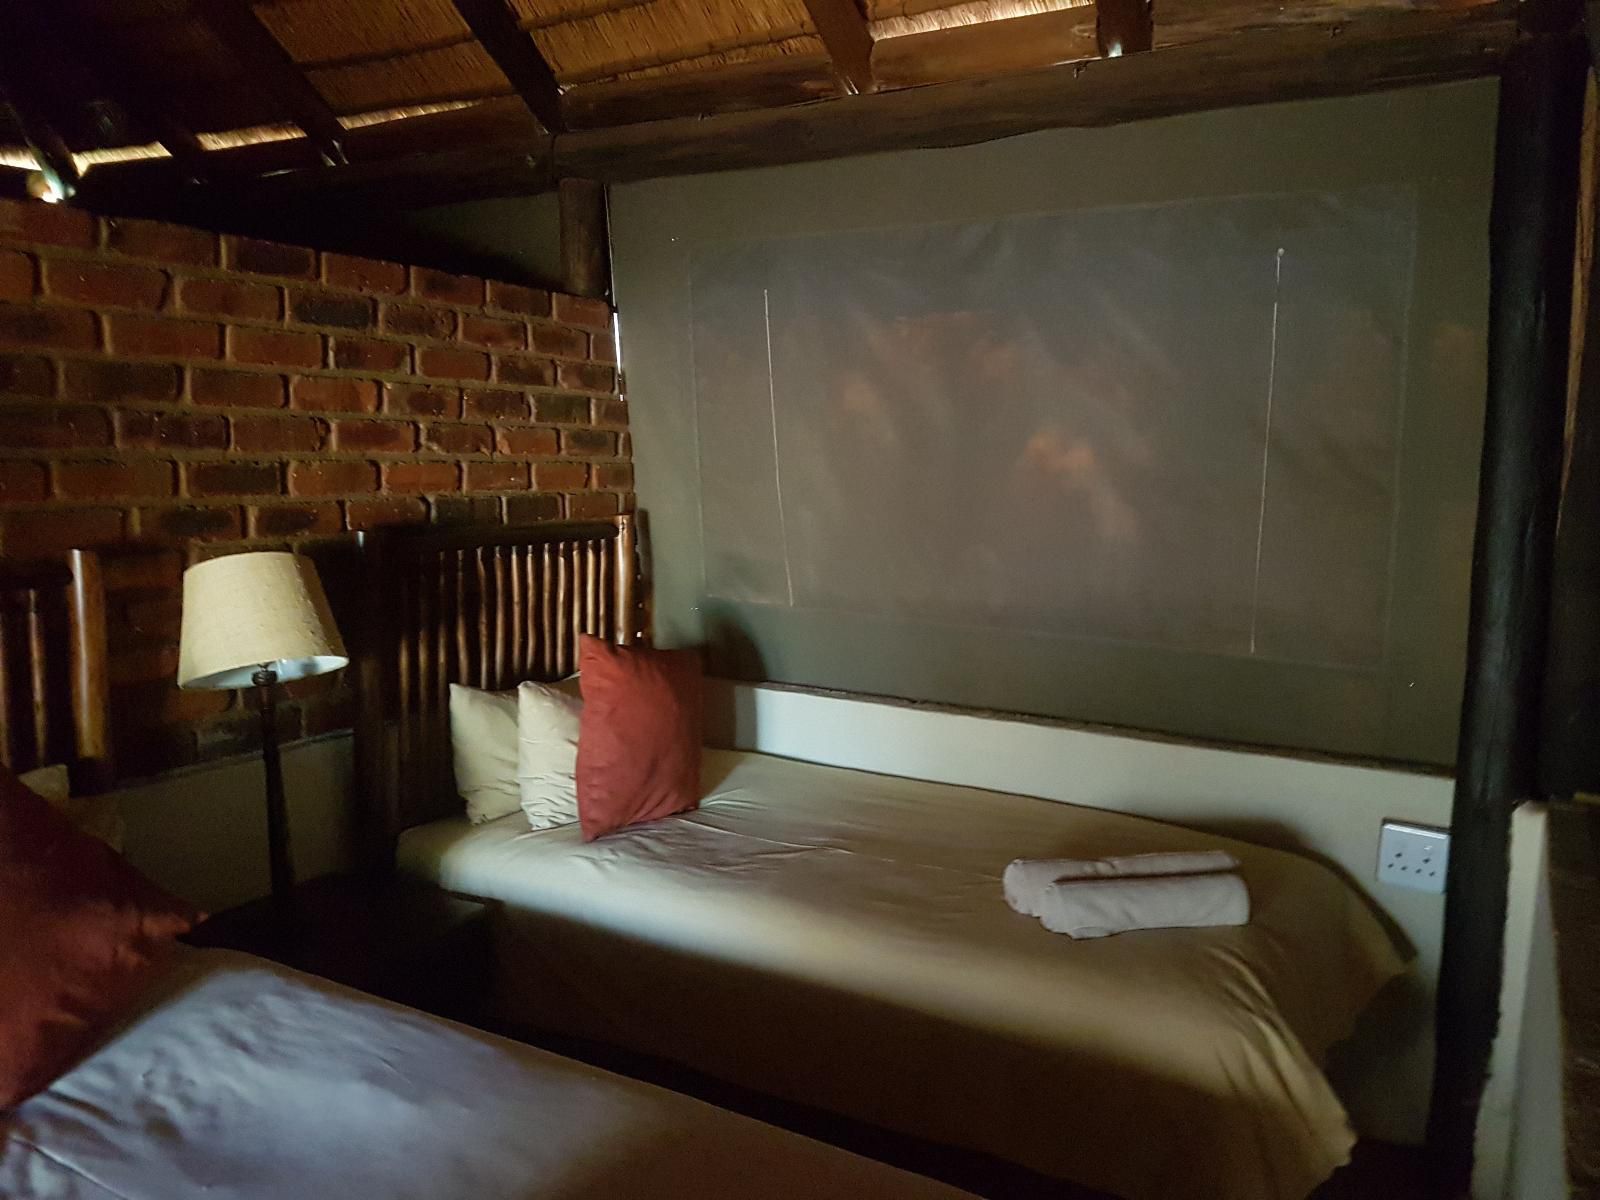 Sondela Nature Reserve And Spa Moselesele Tent Camp Bela Bela Warmbaths Limpopo Province South Africa Window, Architecture, Bedroom